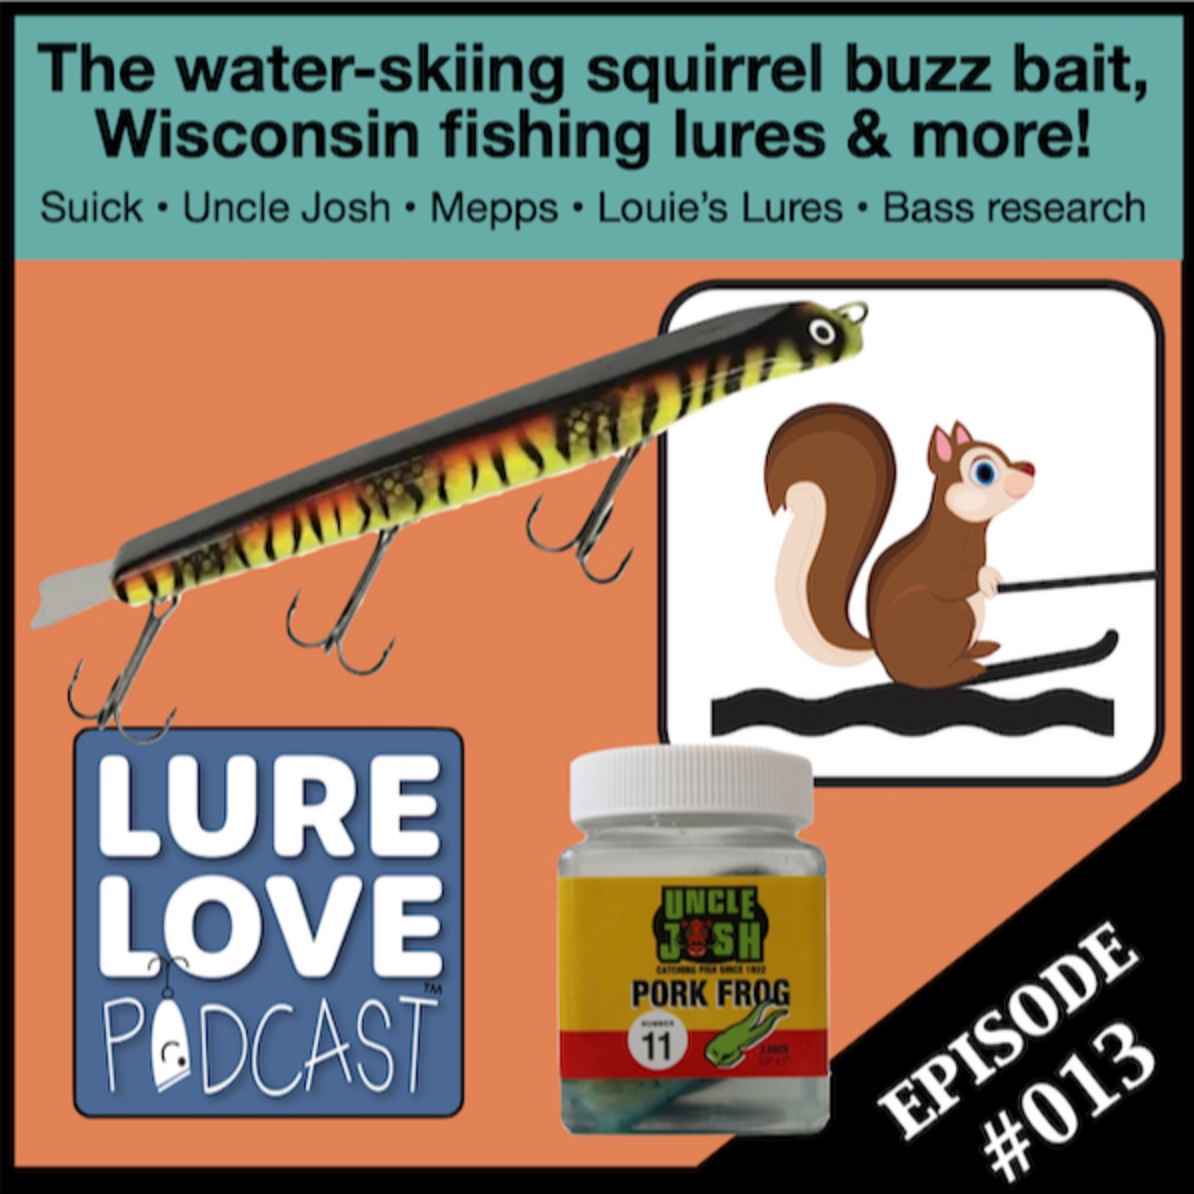 Water-skiing squirrel buzz baits, Wisconsin fishing lures & lure research updates Image